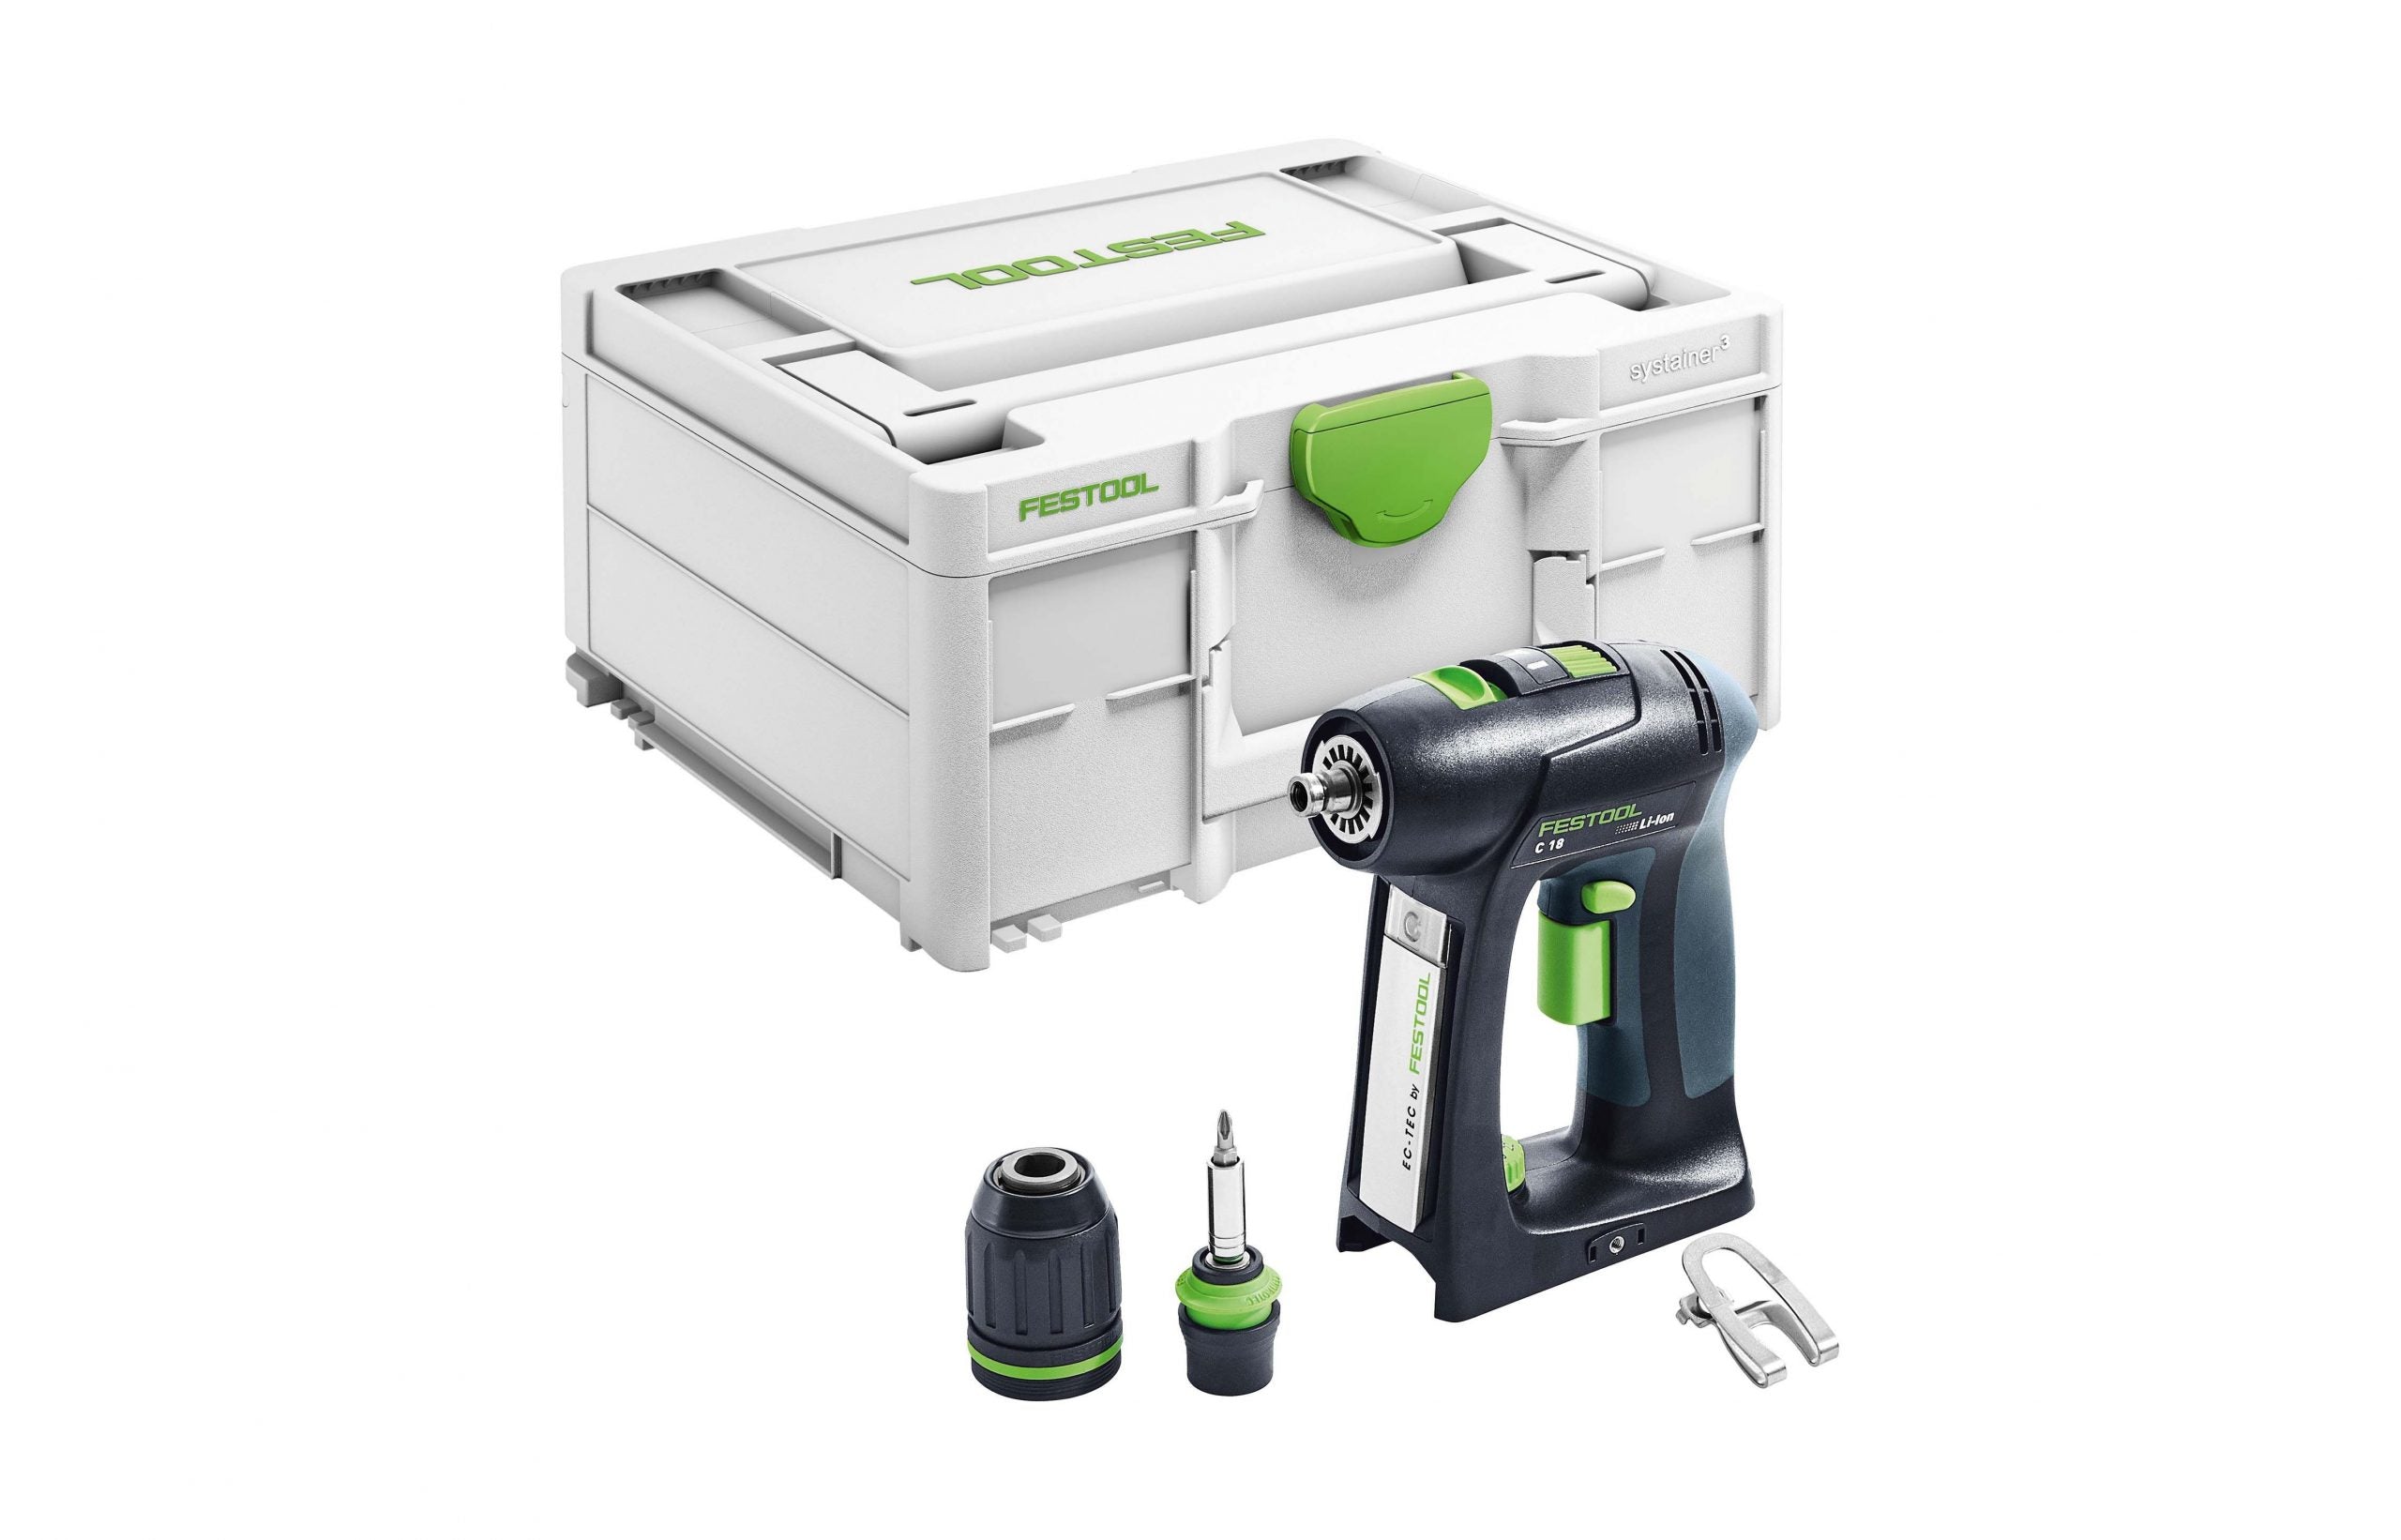 18V Cordless 2 Speed Basic Drill in Systainer 576434 by Festool